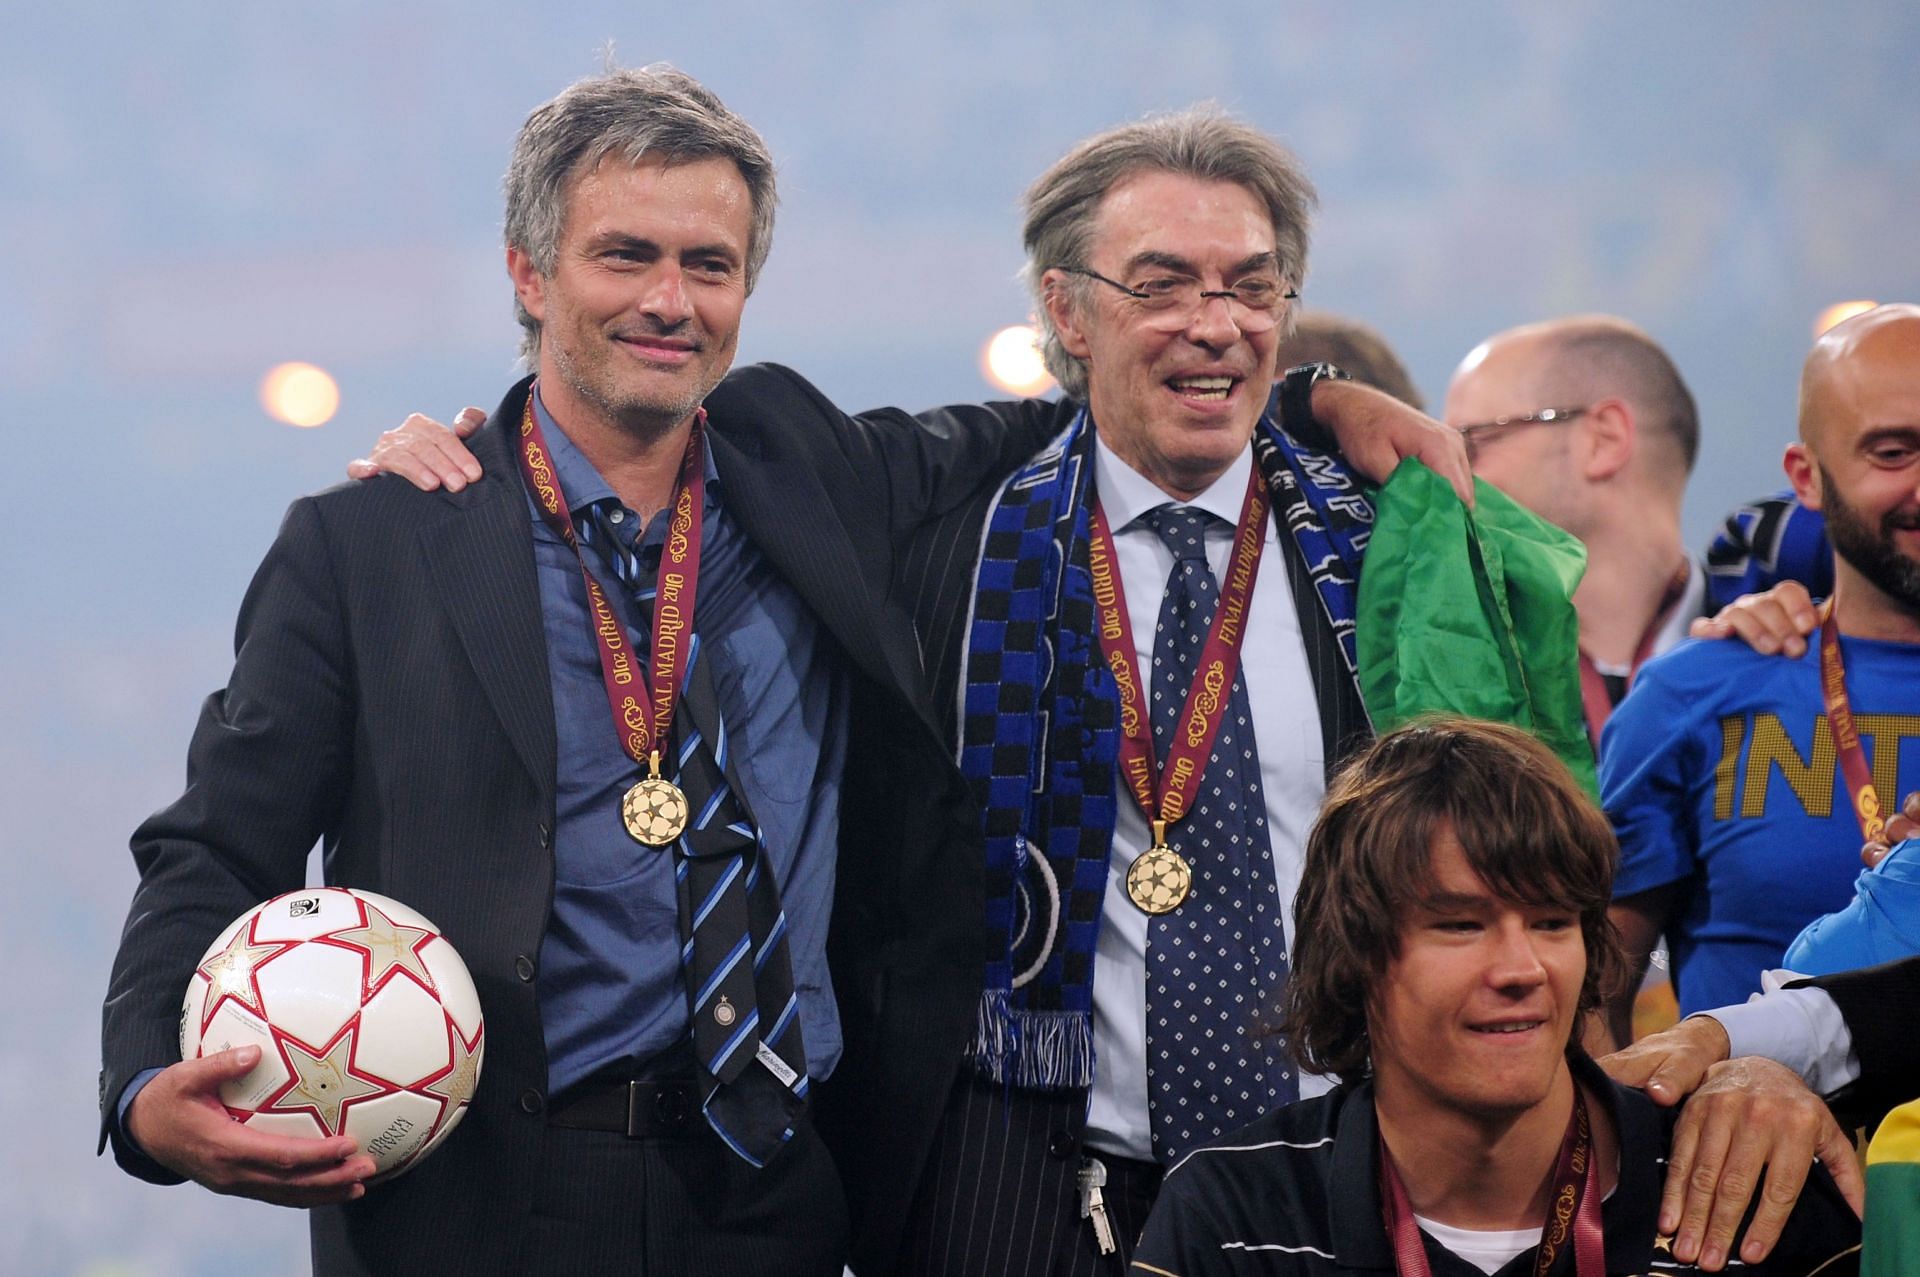 Jose Mourinho (left) celebrates the Champions League final victory over Bayern Munich in 2010.